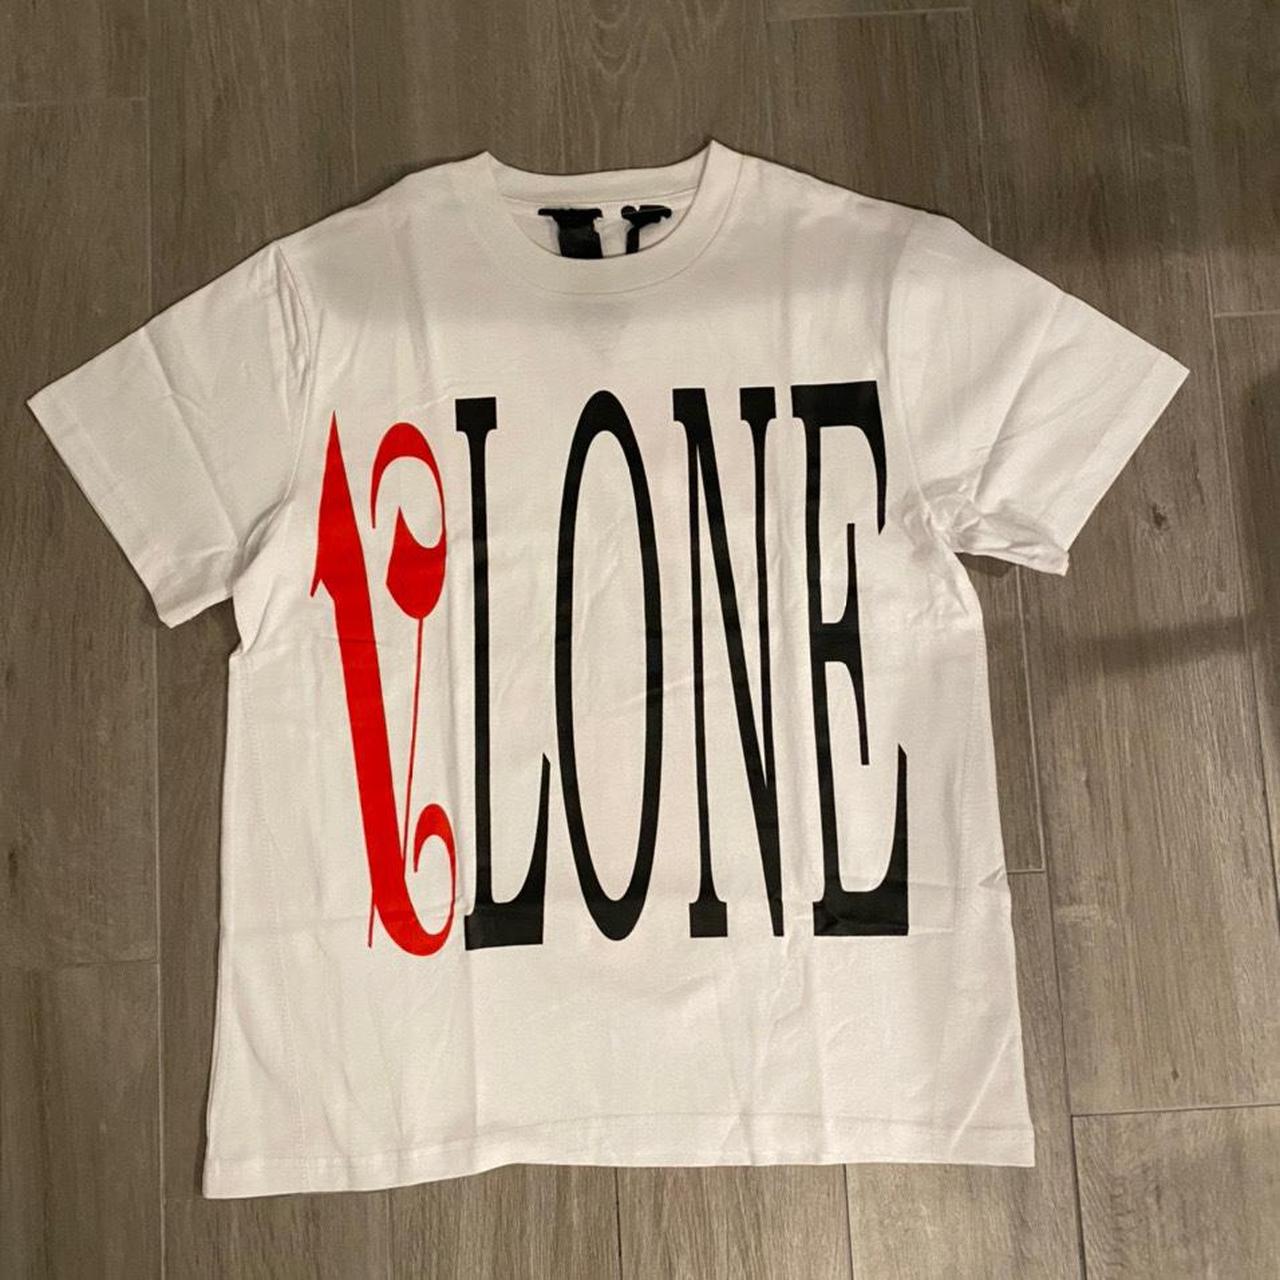 Vlone x Palm Angels White/Red Tee